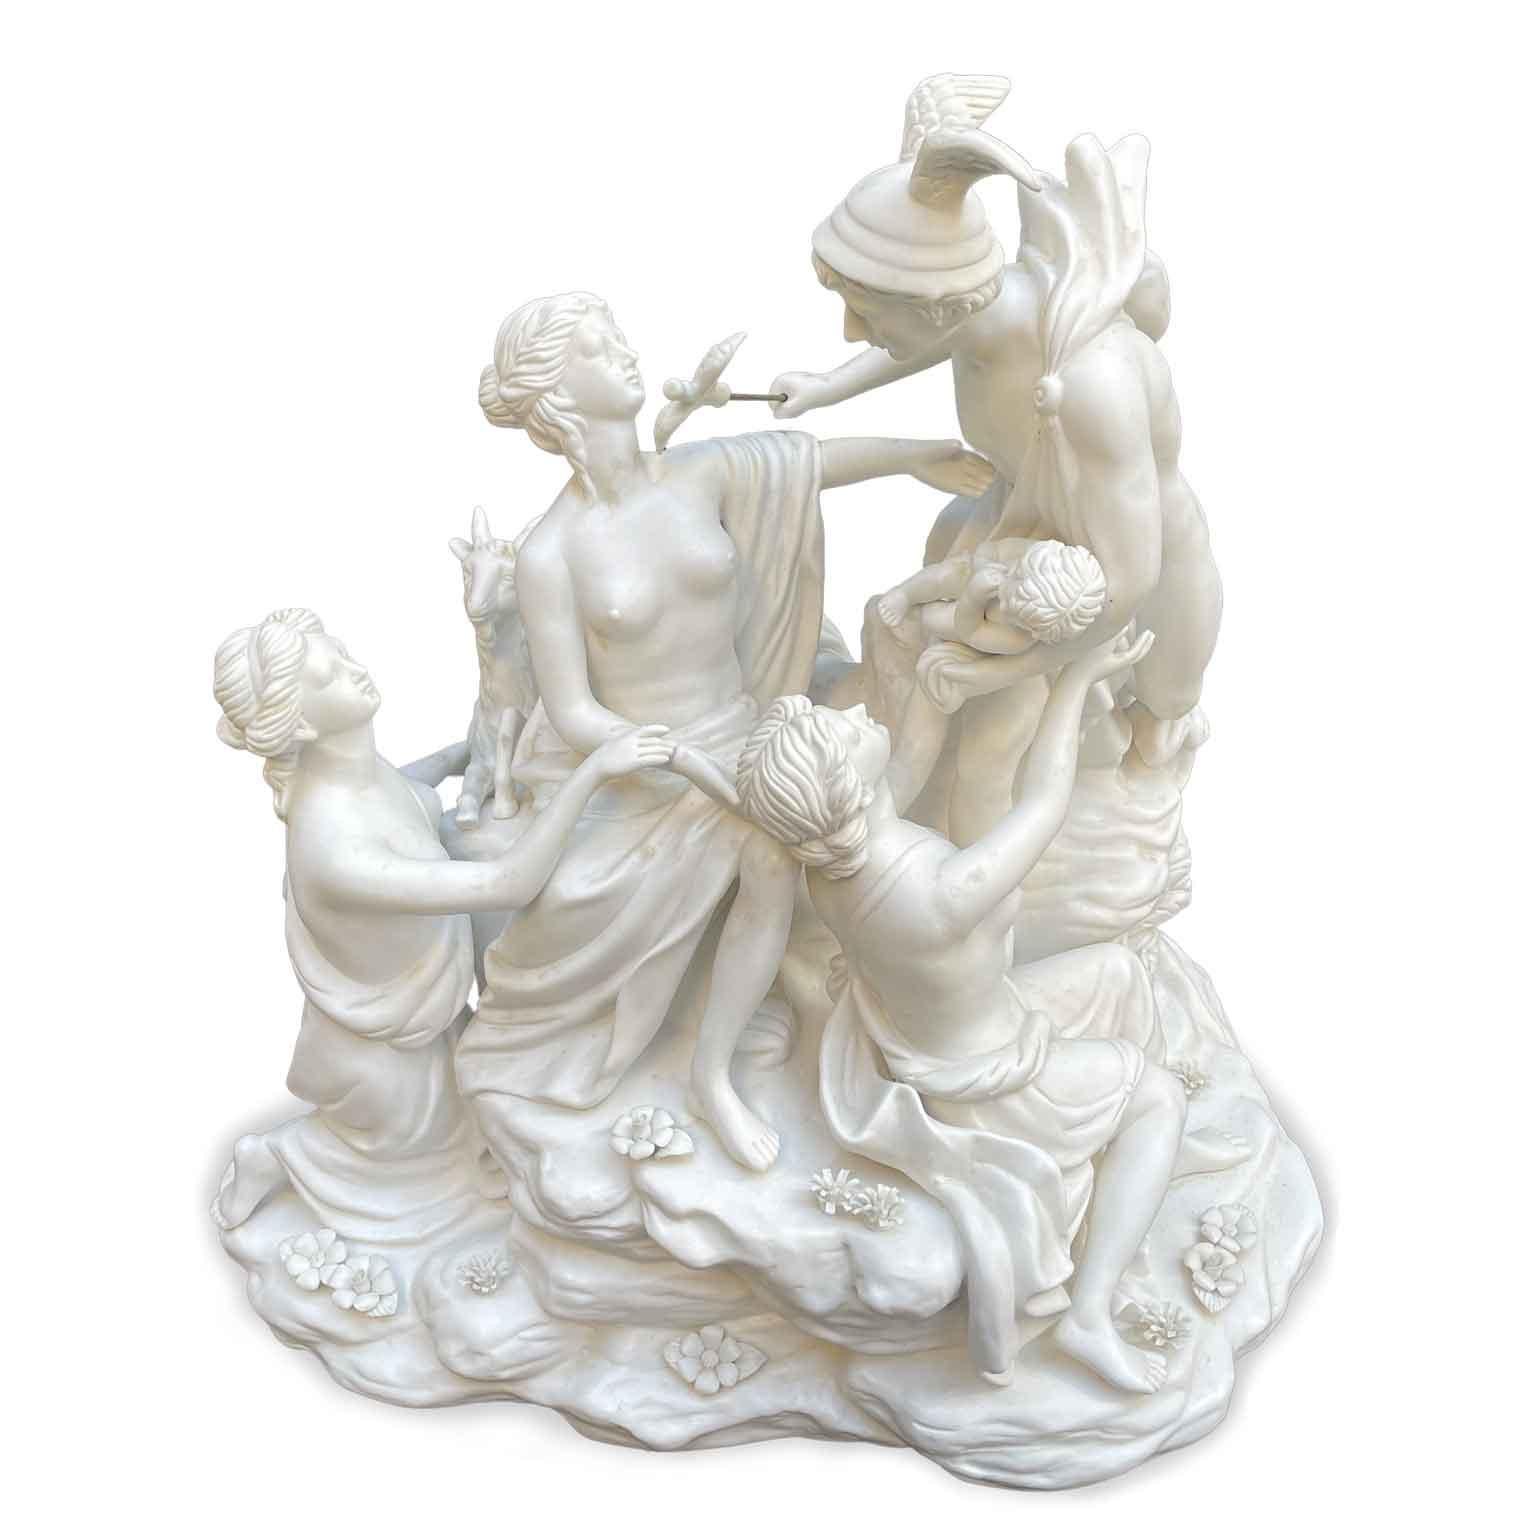 Neoclassical Revival Centerpiece In White Porcelain Biscuit 20th Century Mythological Sculptural Group For Sale